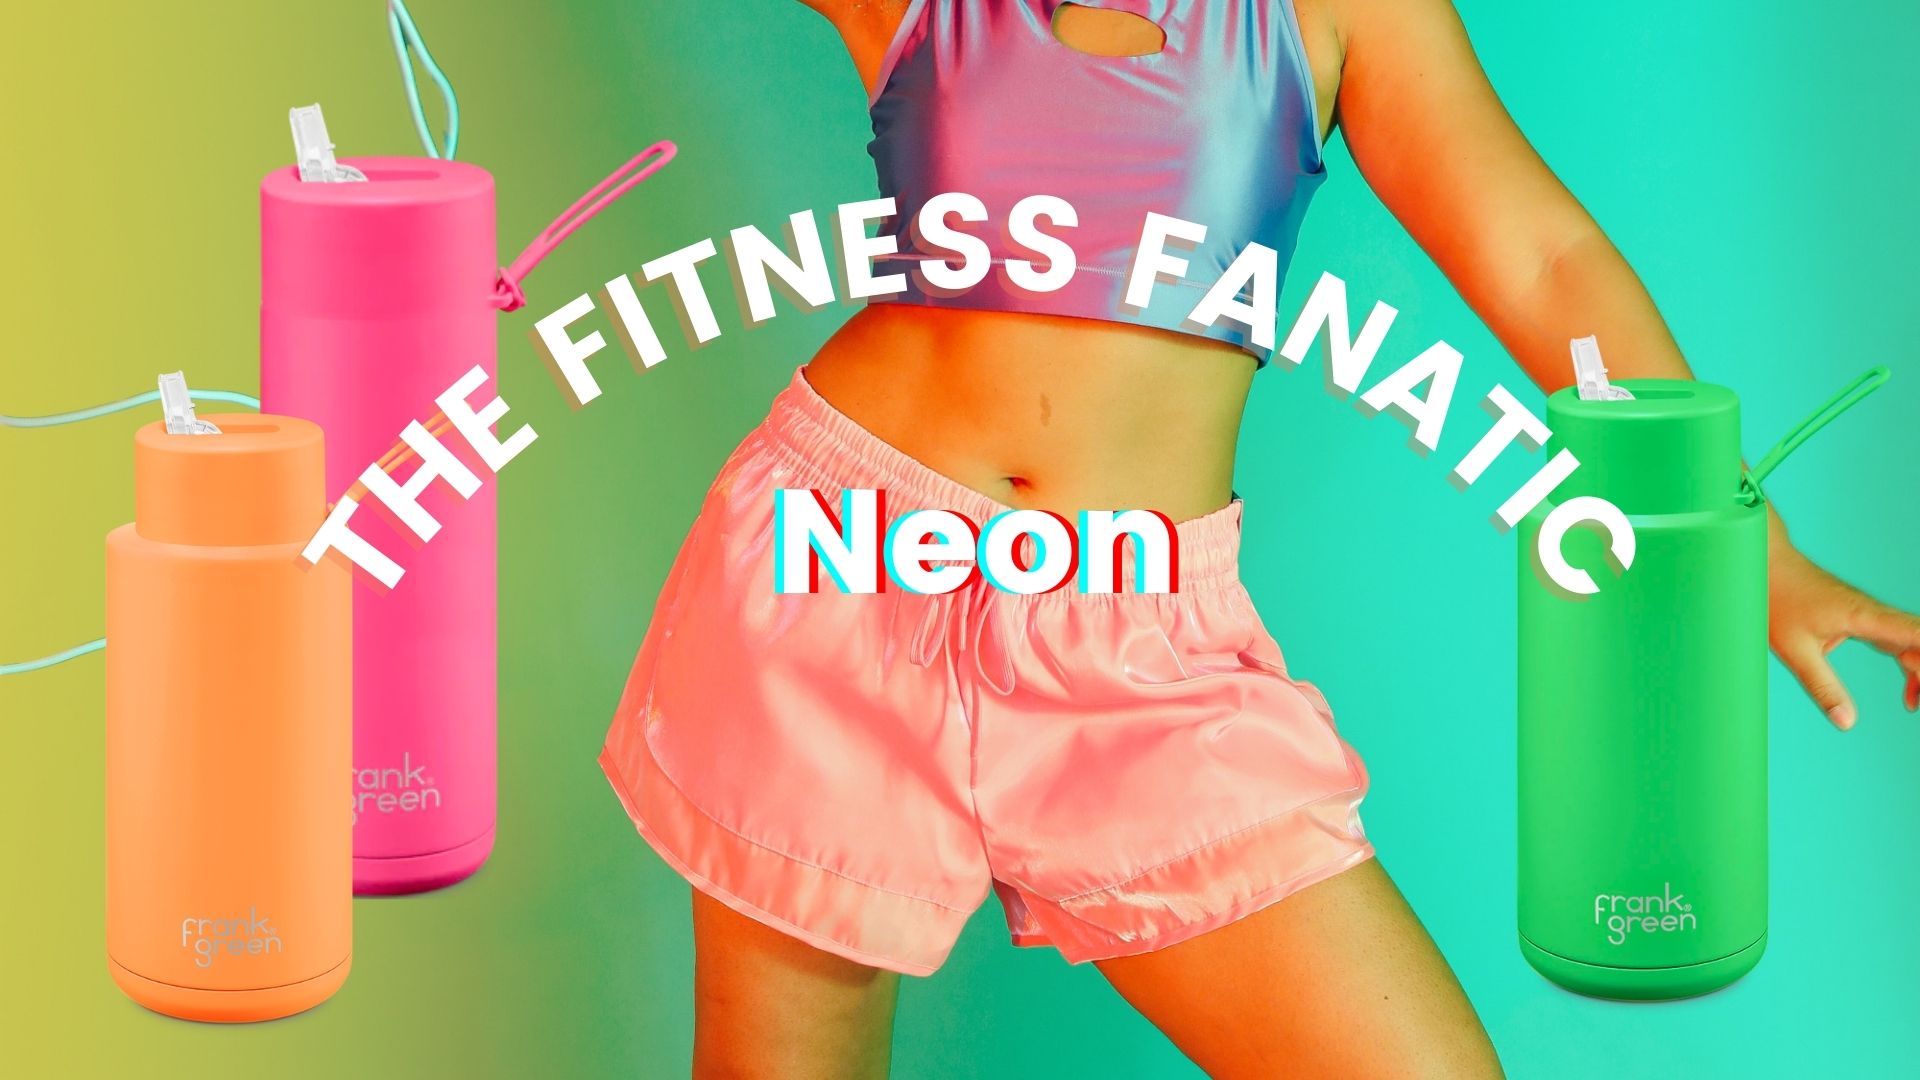 Frank Green drink bottles in neon with a woman in active wear in the middle